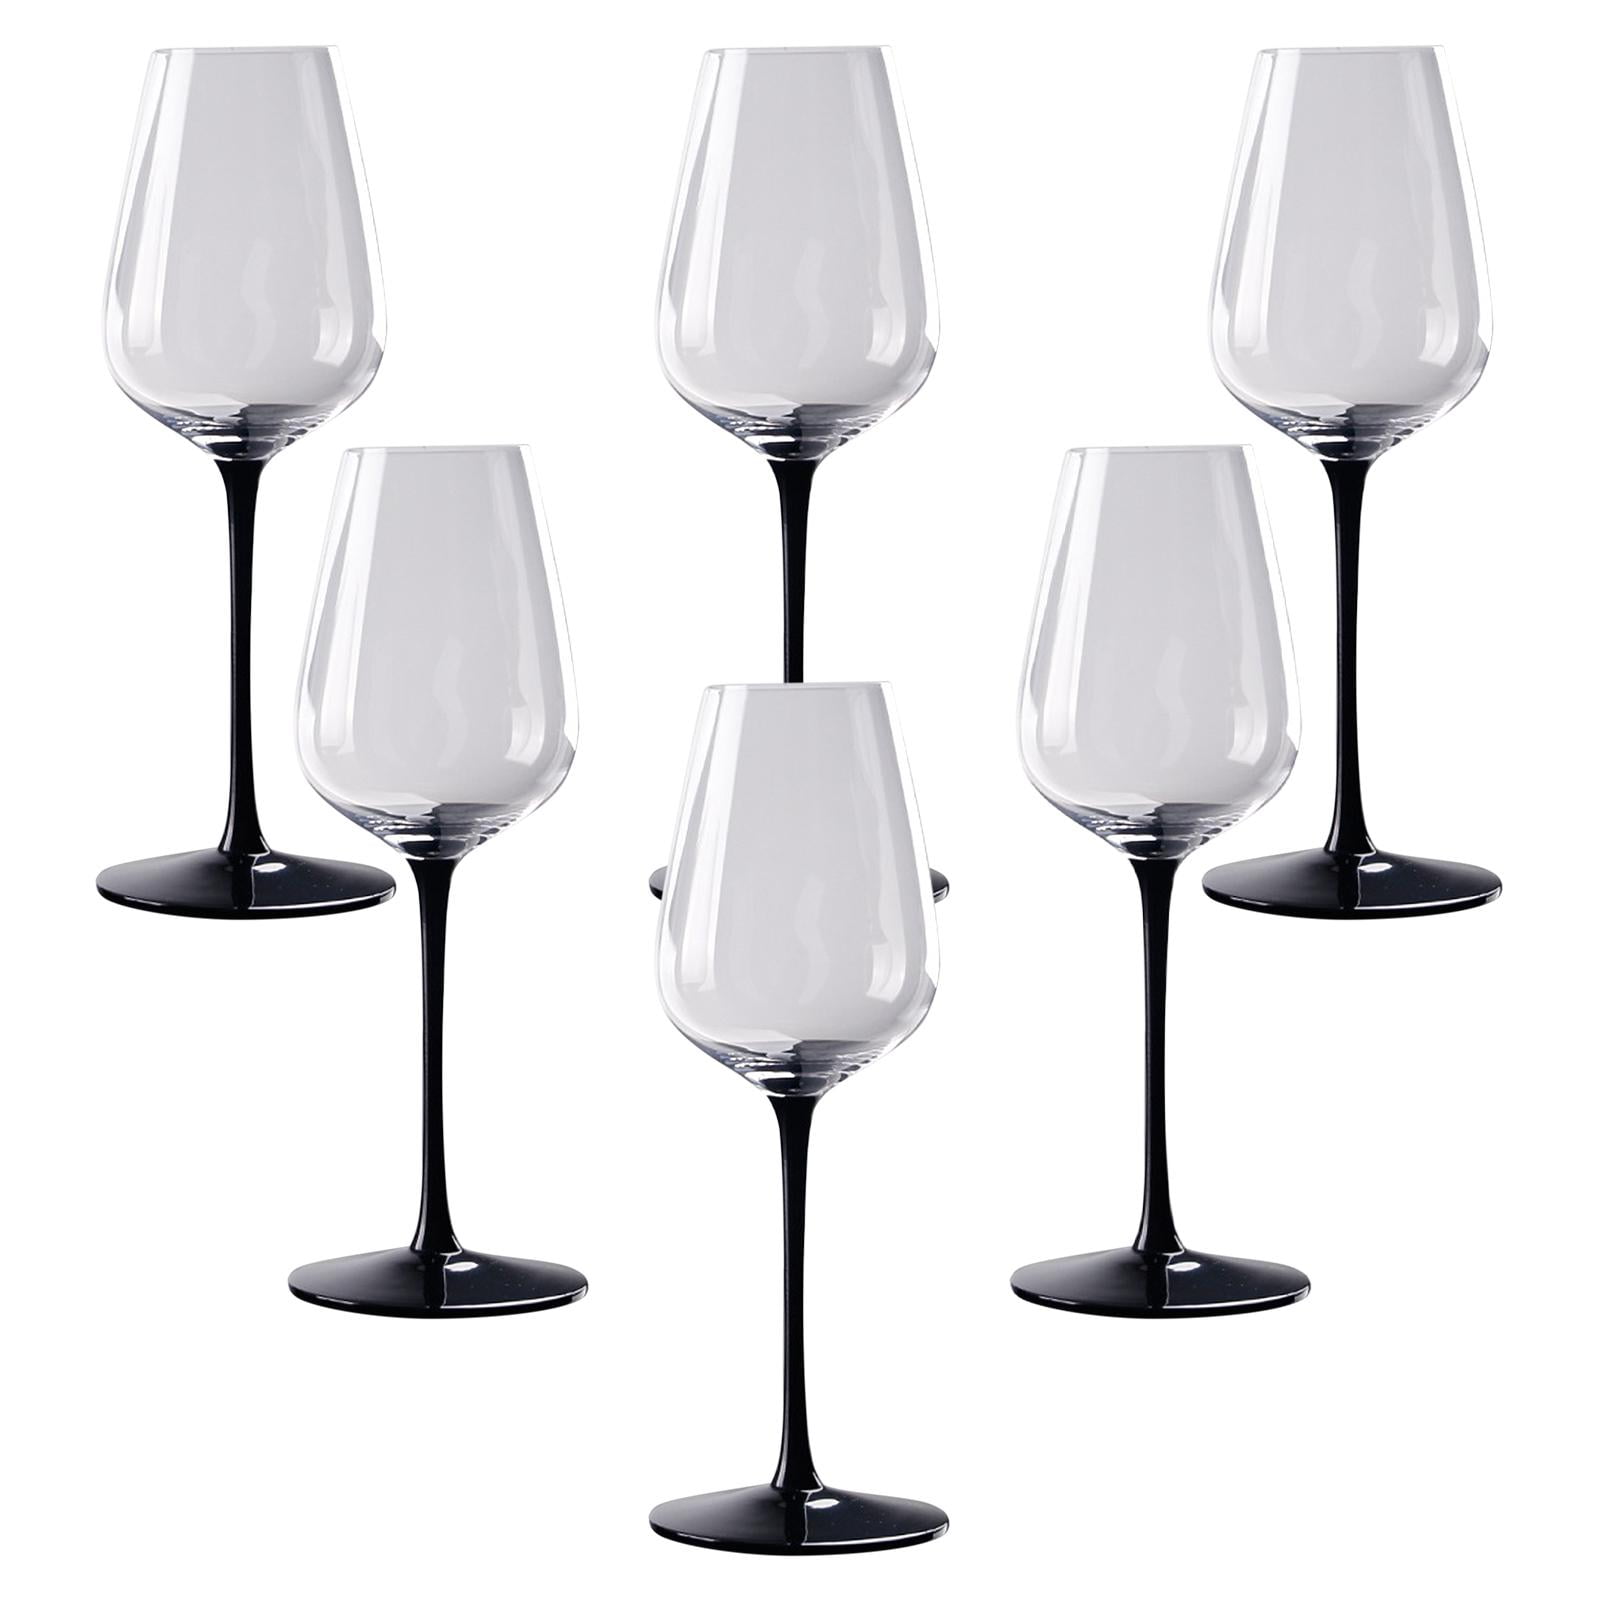 6 pieces Metal Wine Champagne Drinks Cups Glasses Goblets for Home Party Use 